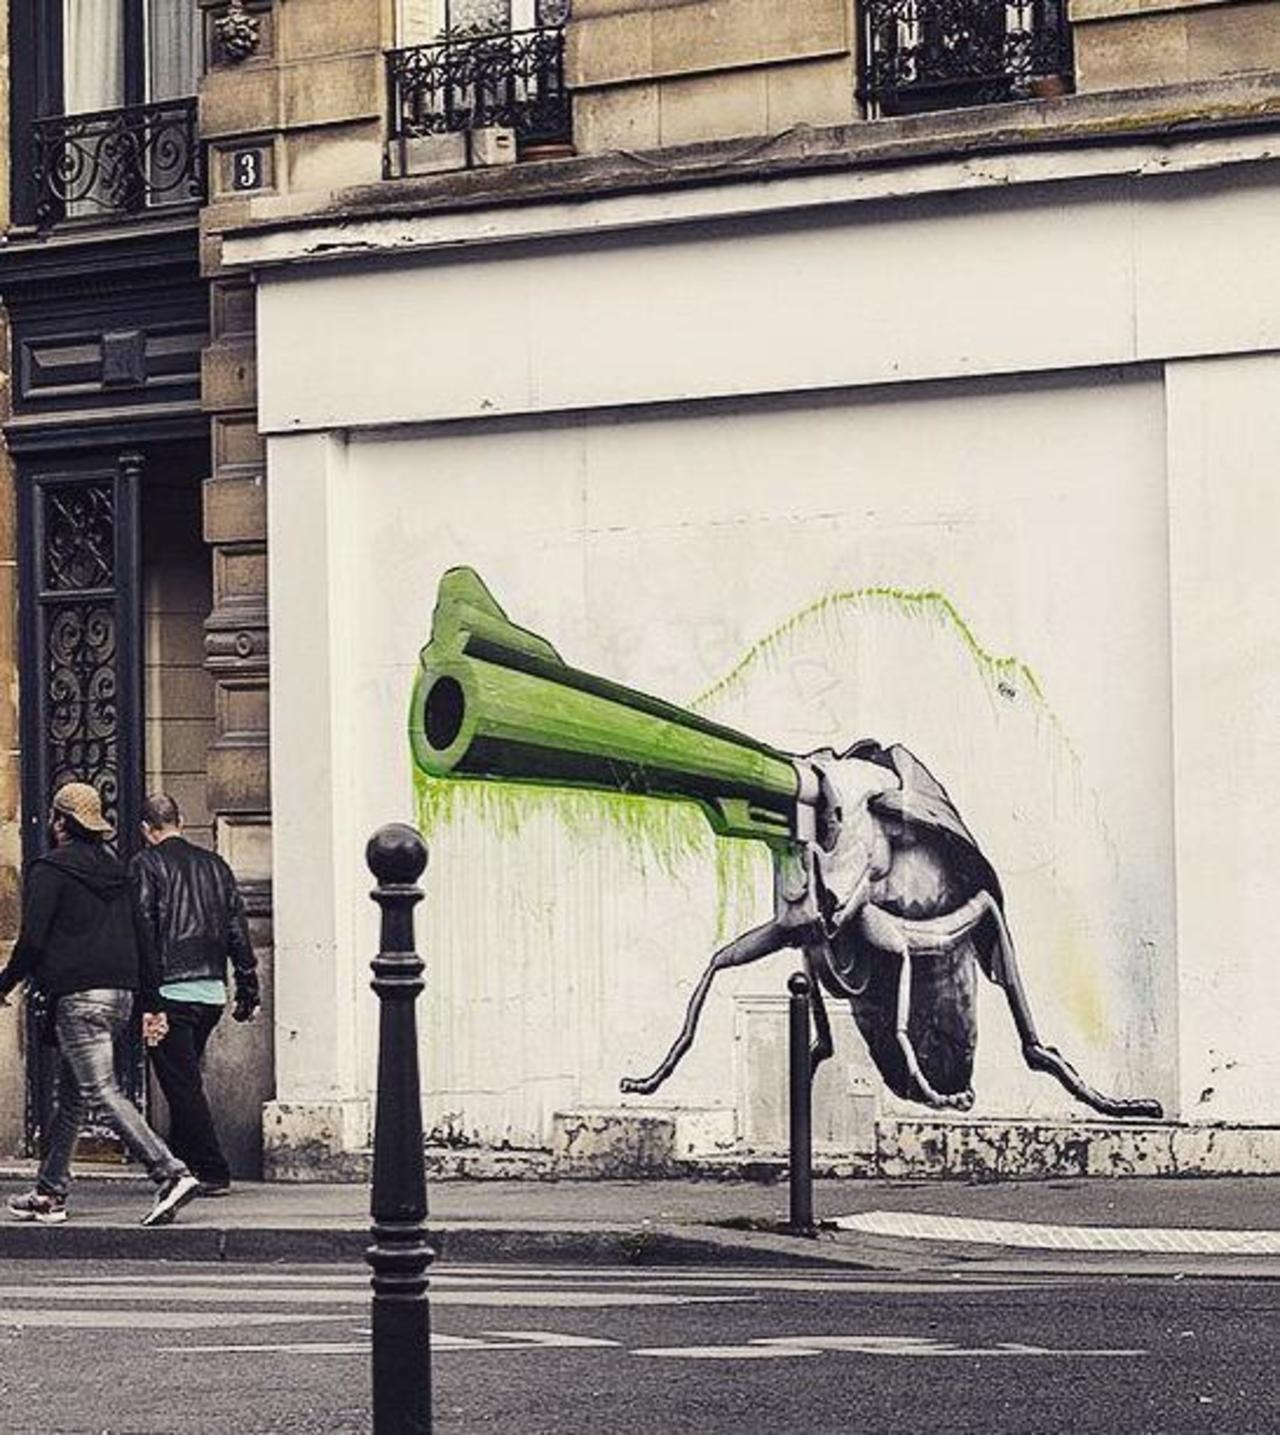 Technology merges with nature.
Street Art by Ludo in Paris 

#art #arte #graffiti #streetart http://t.co/WxWgQw9sjy